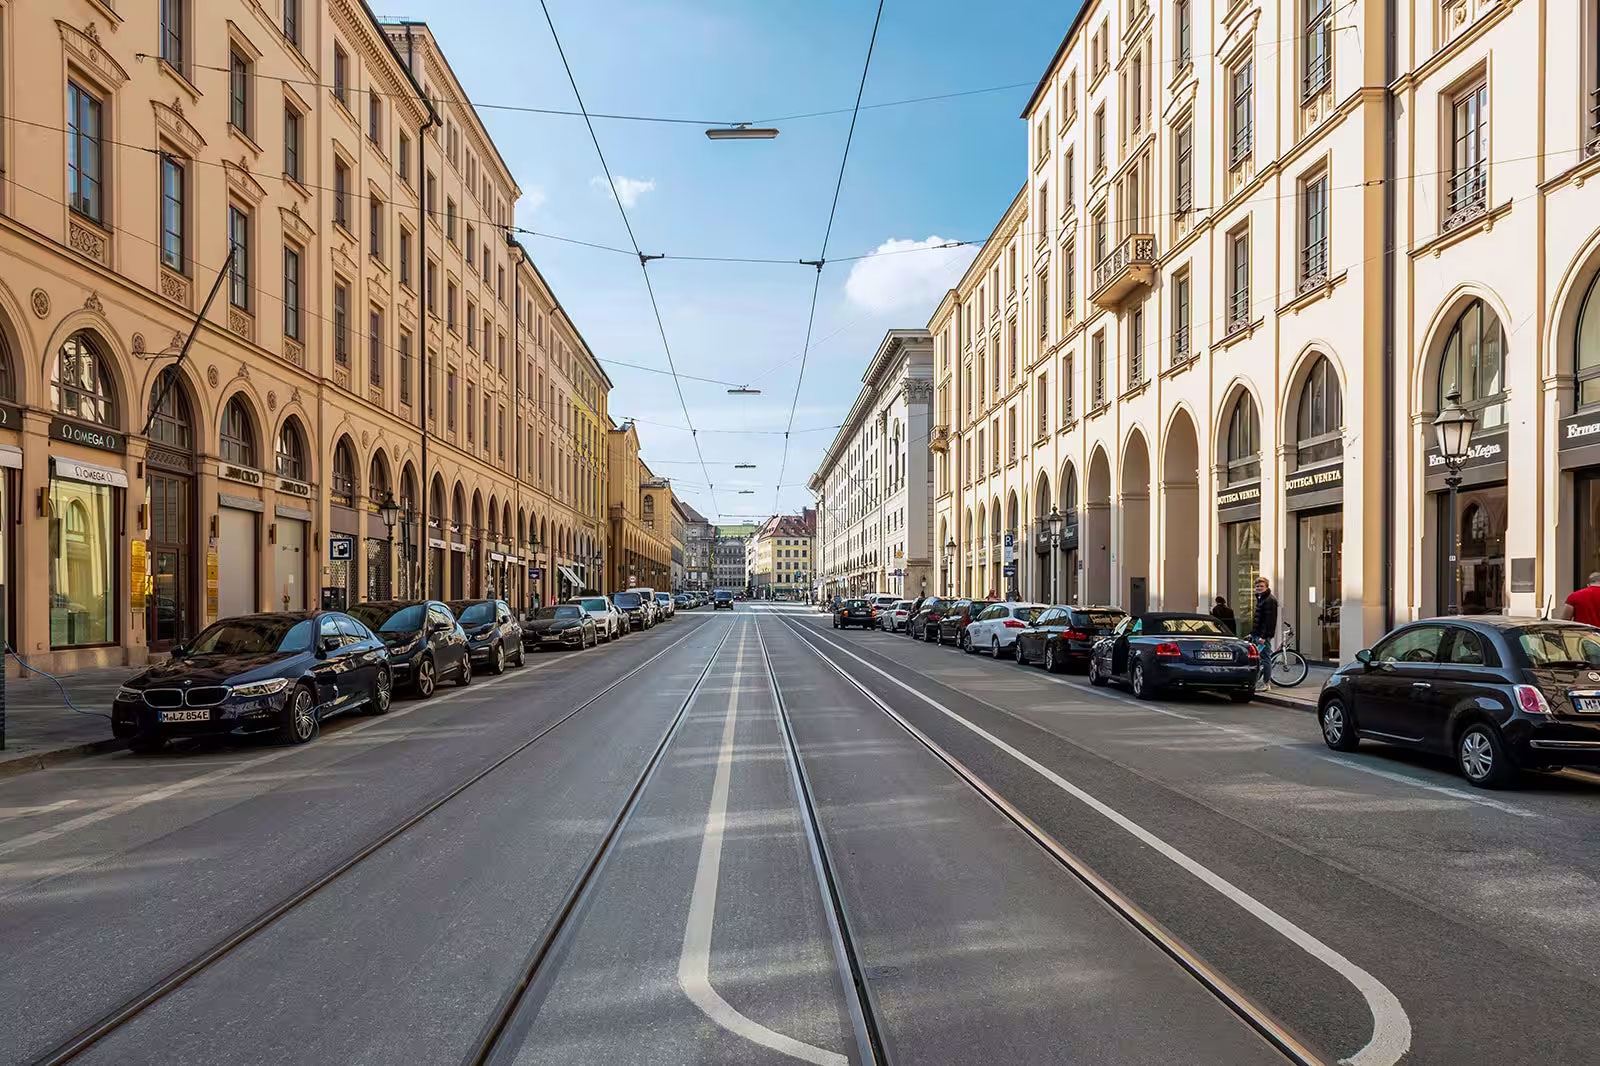 Maximilianstrasse is considered the most exclusive shopping district in Munich